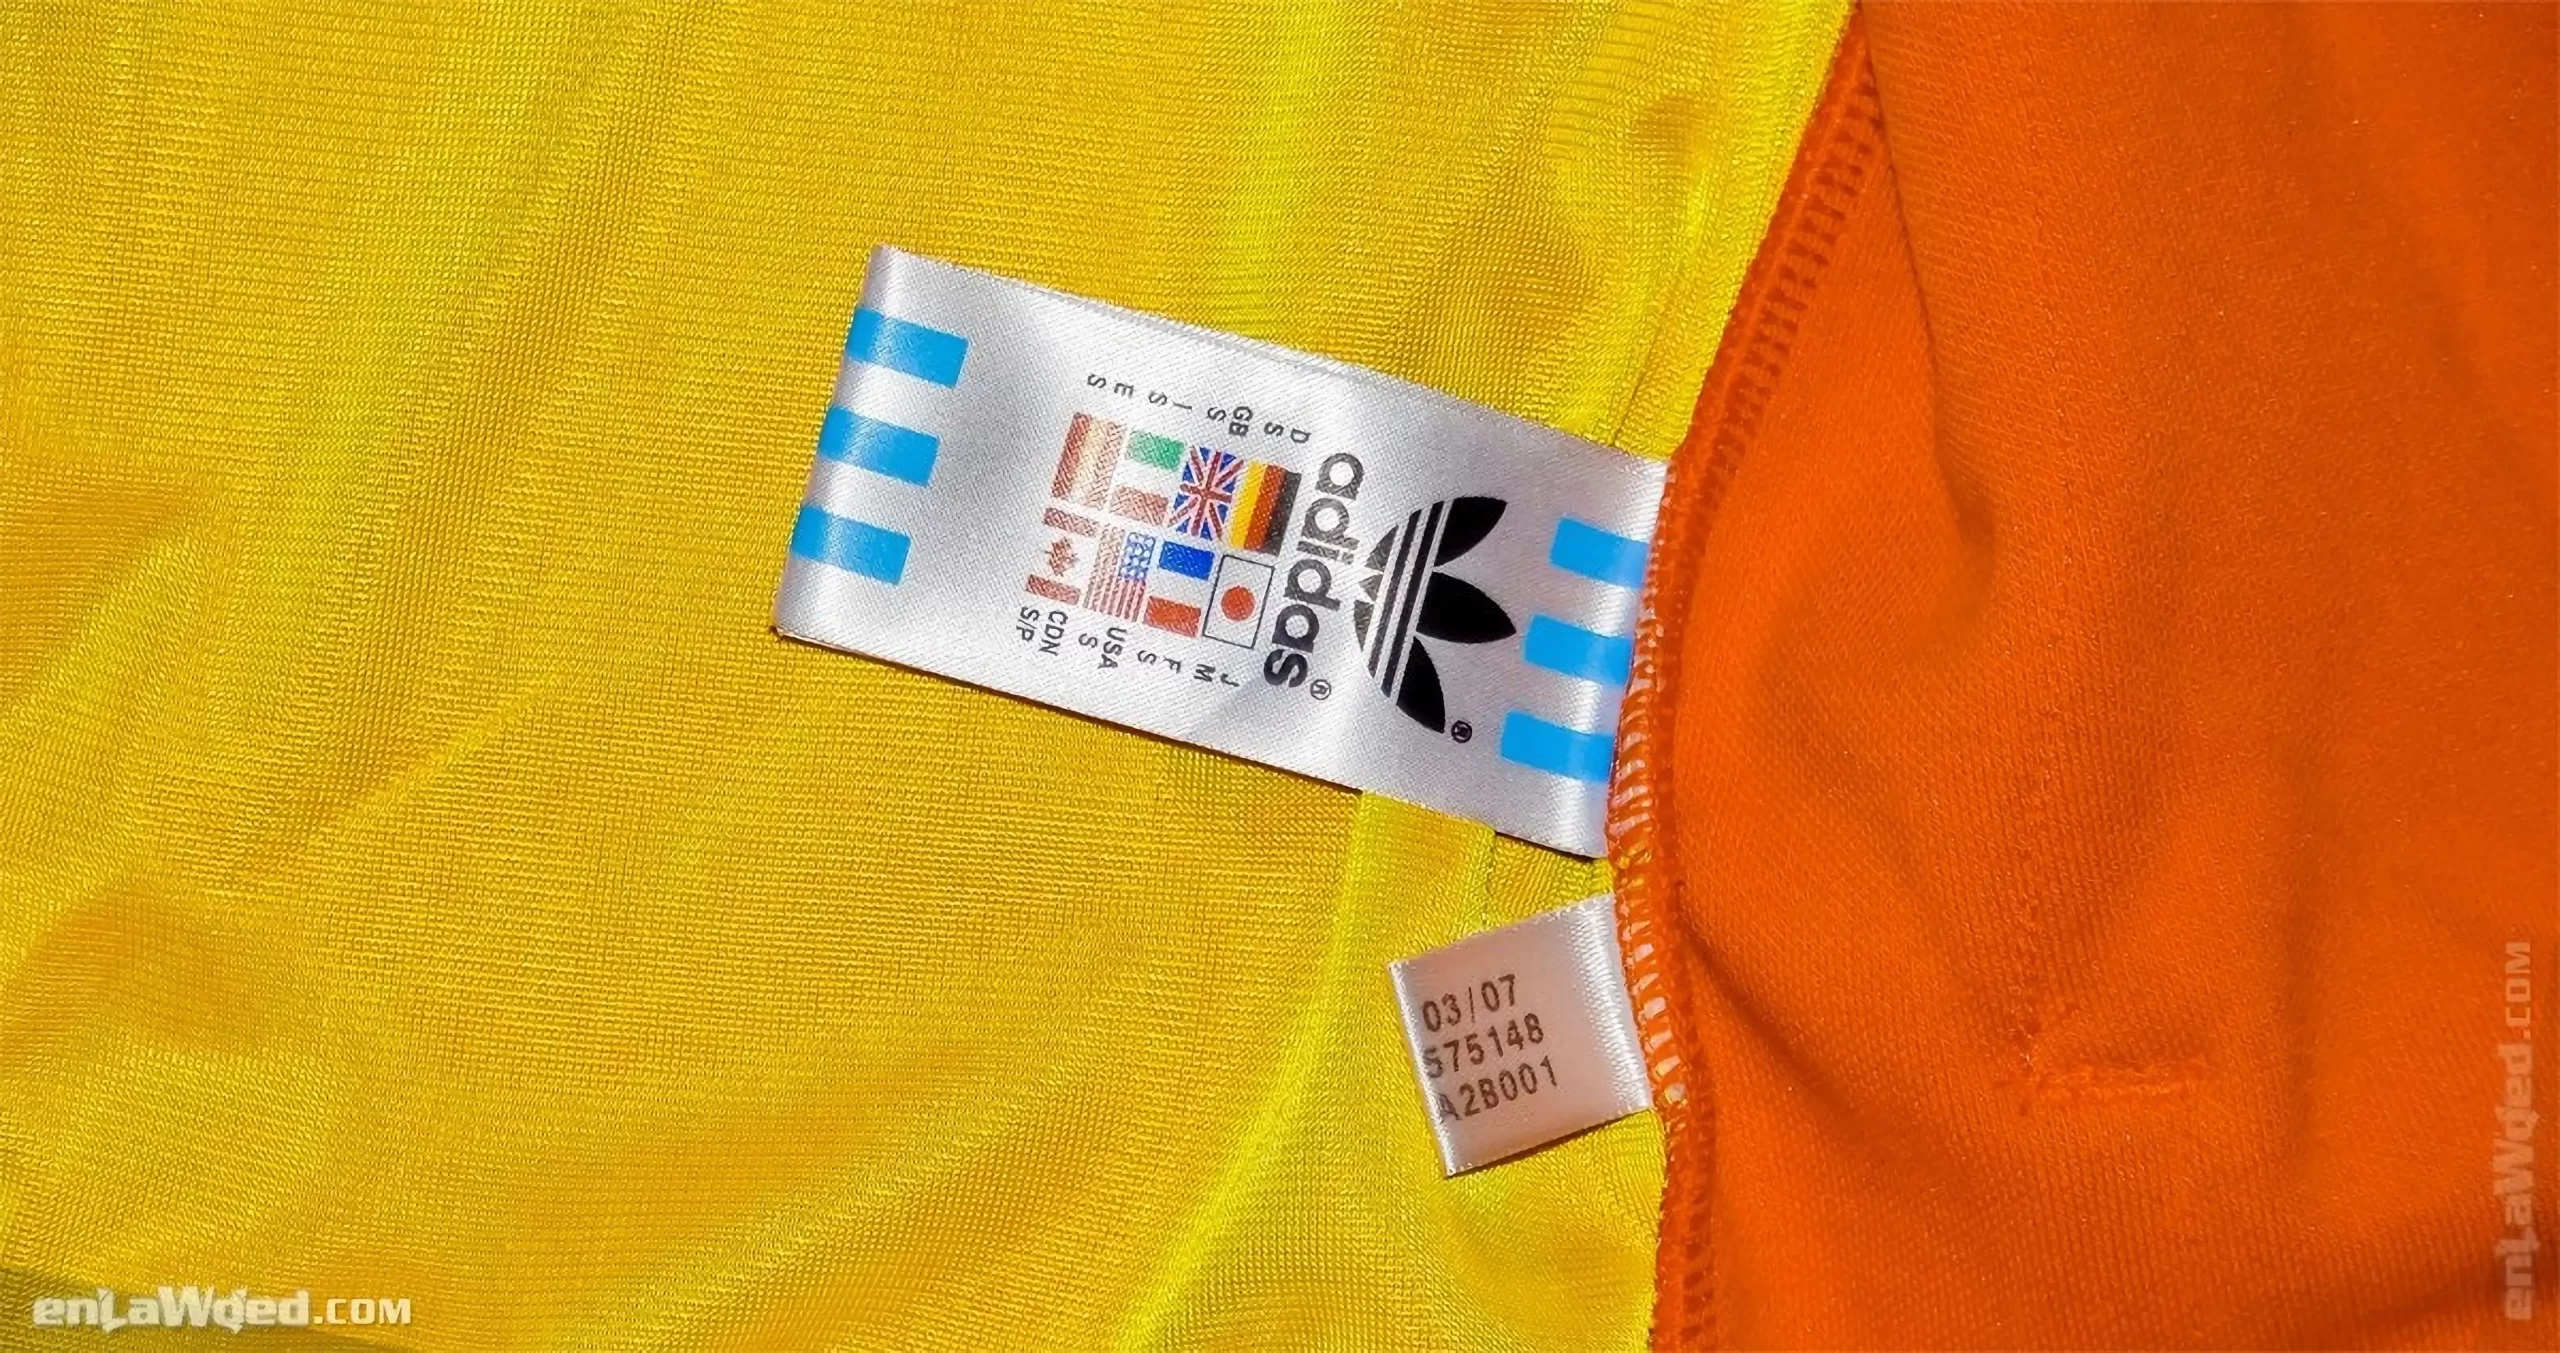 Adidas tag of the Bhutan jacket, with the month and year of fabrication: 03/2007